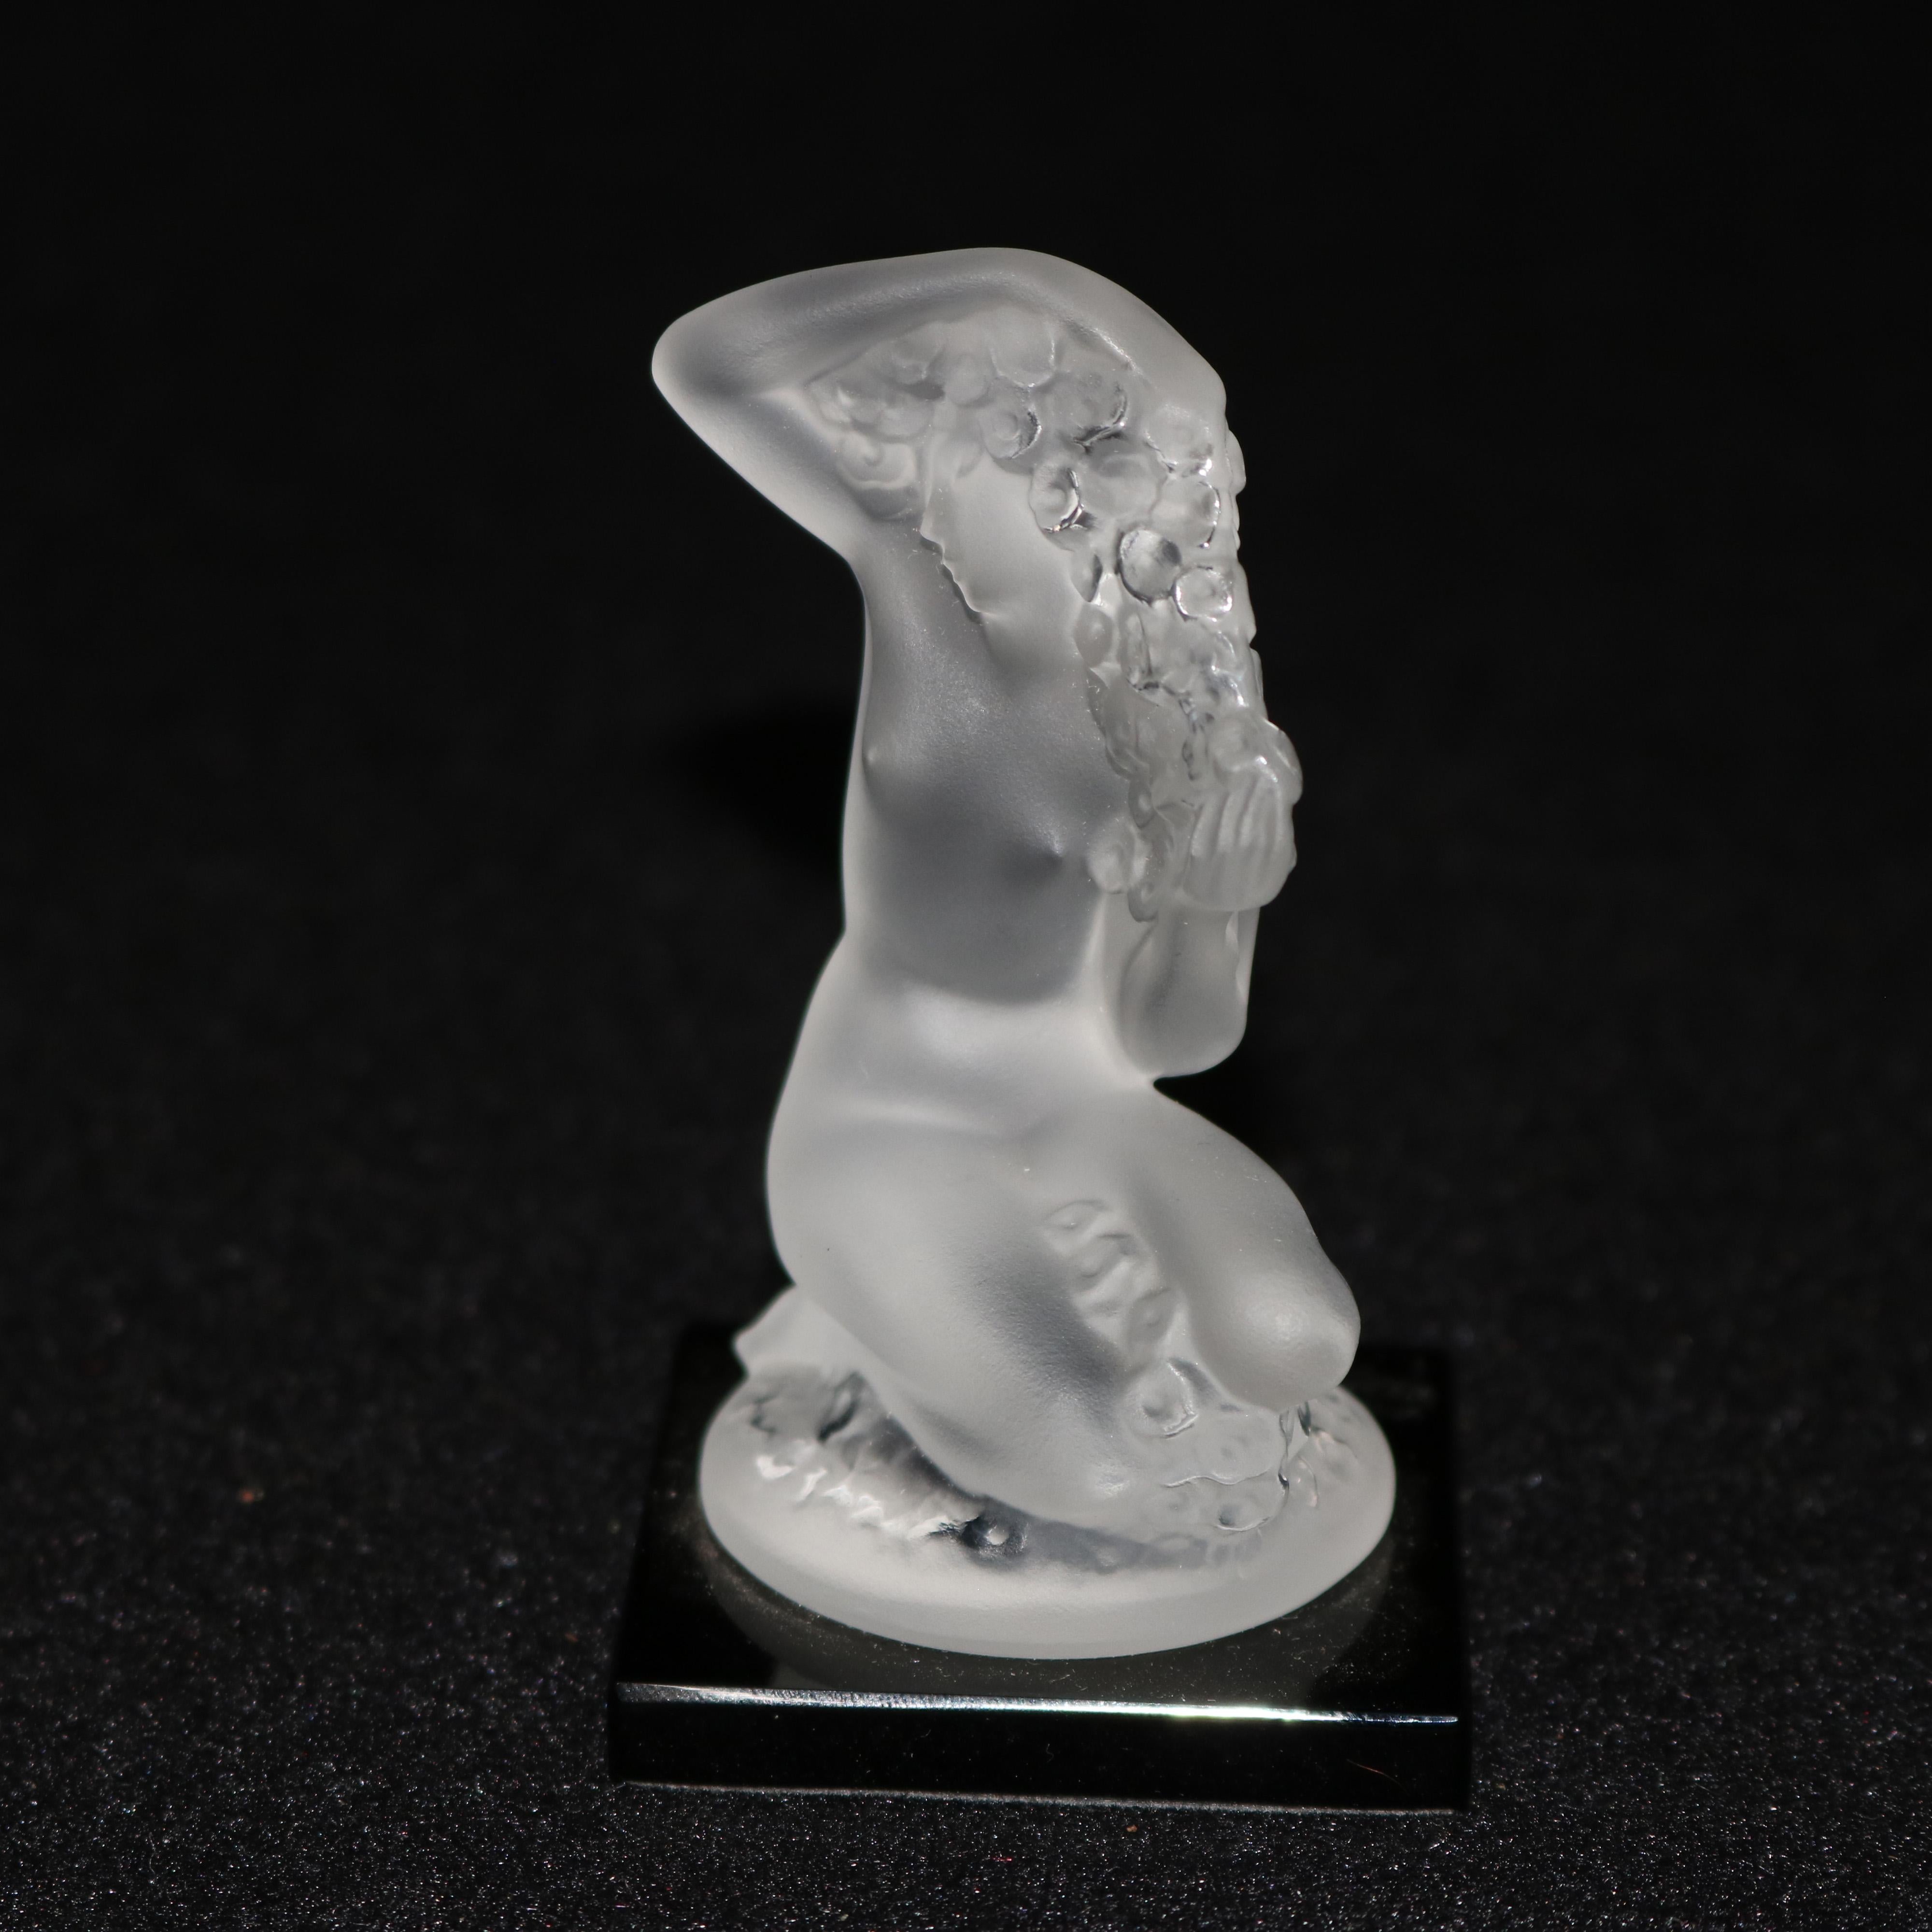 A French Art Nouveau style desk paperweight figure by Lalique offers frosted crystal portrait sculpture of nude woman titled 